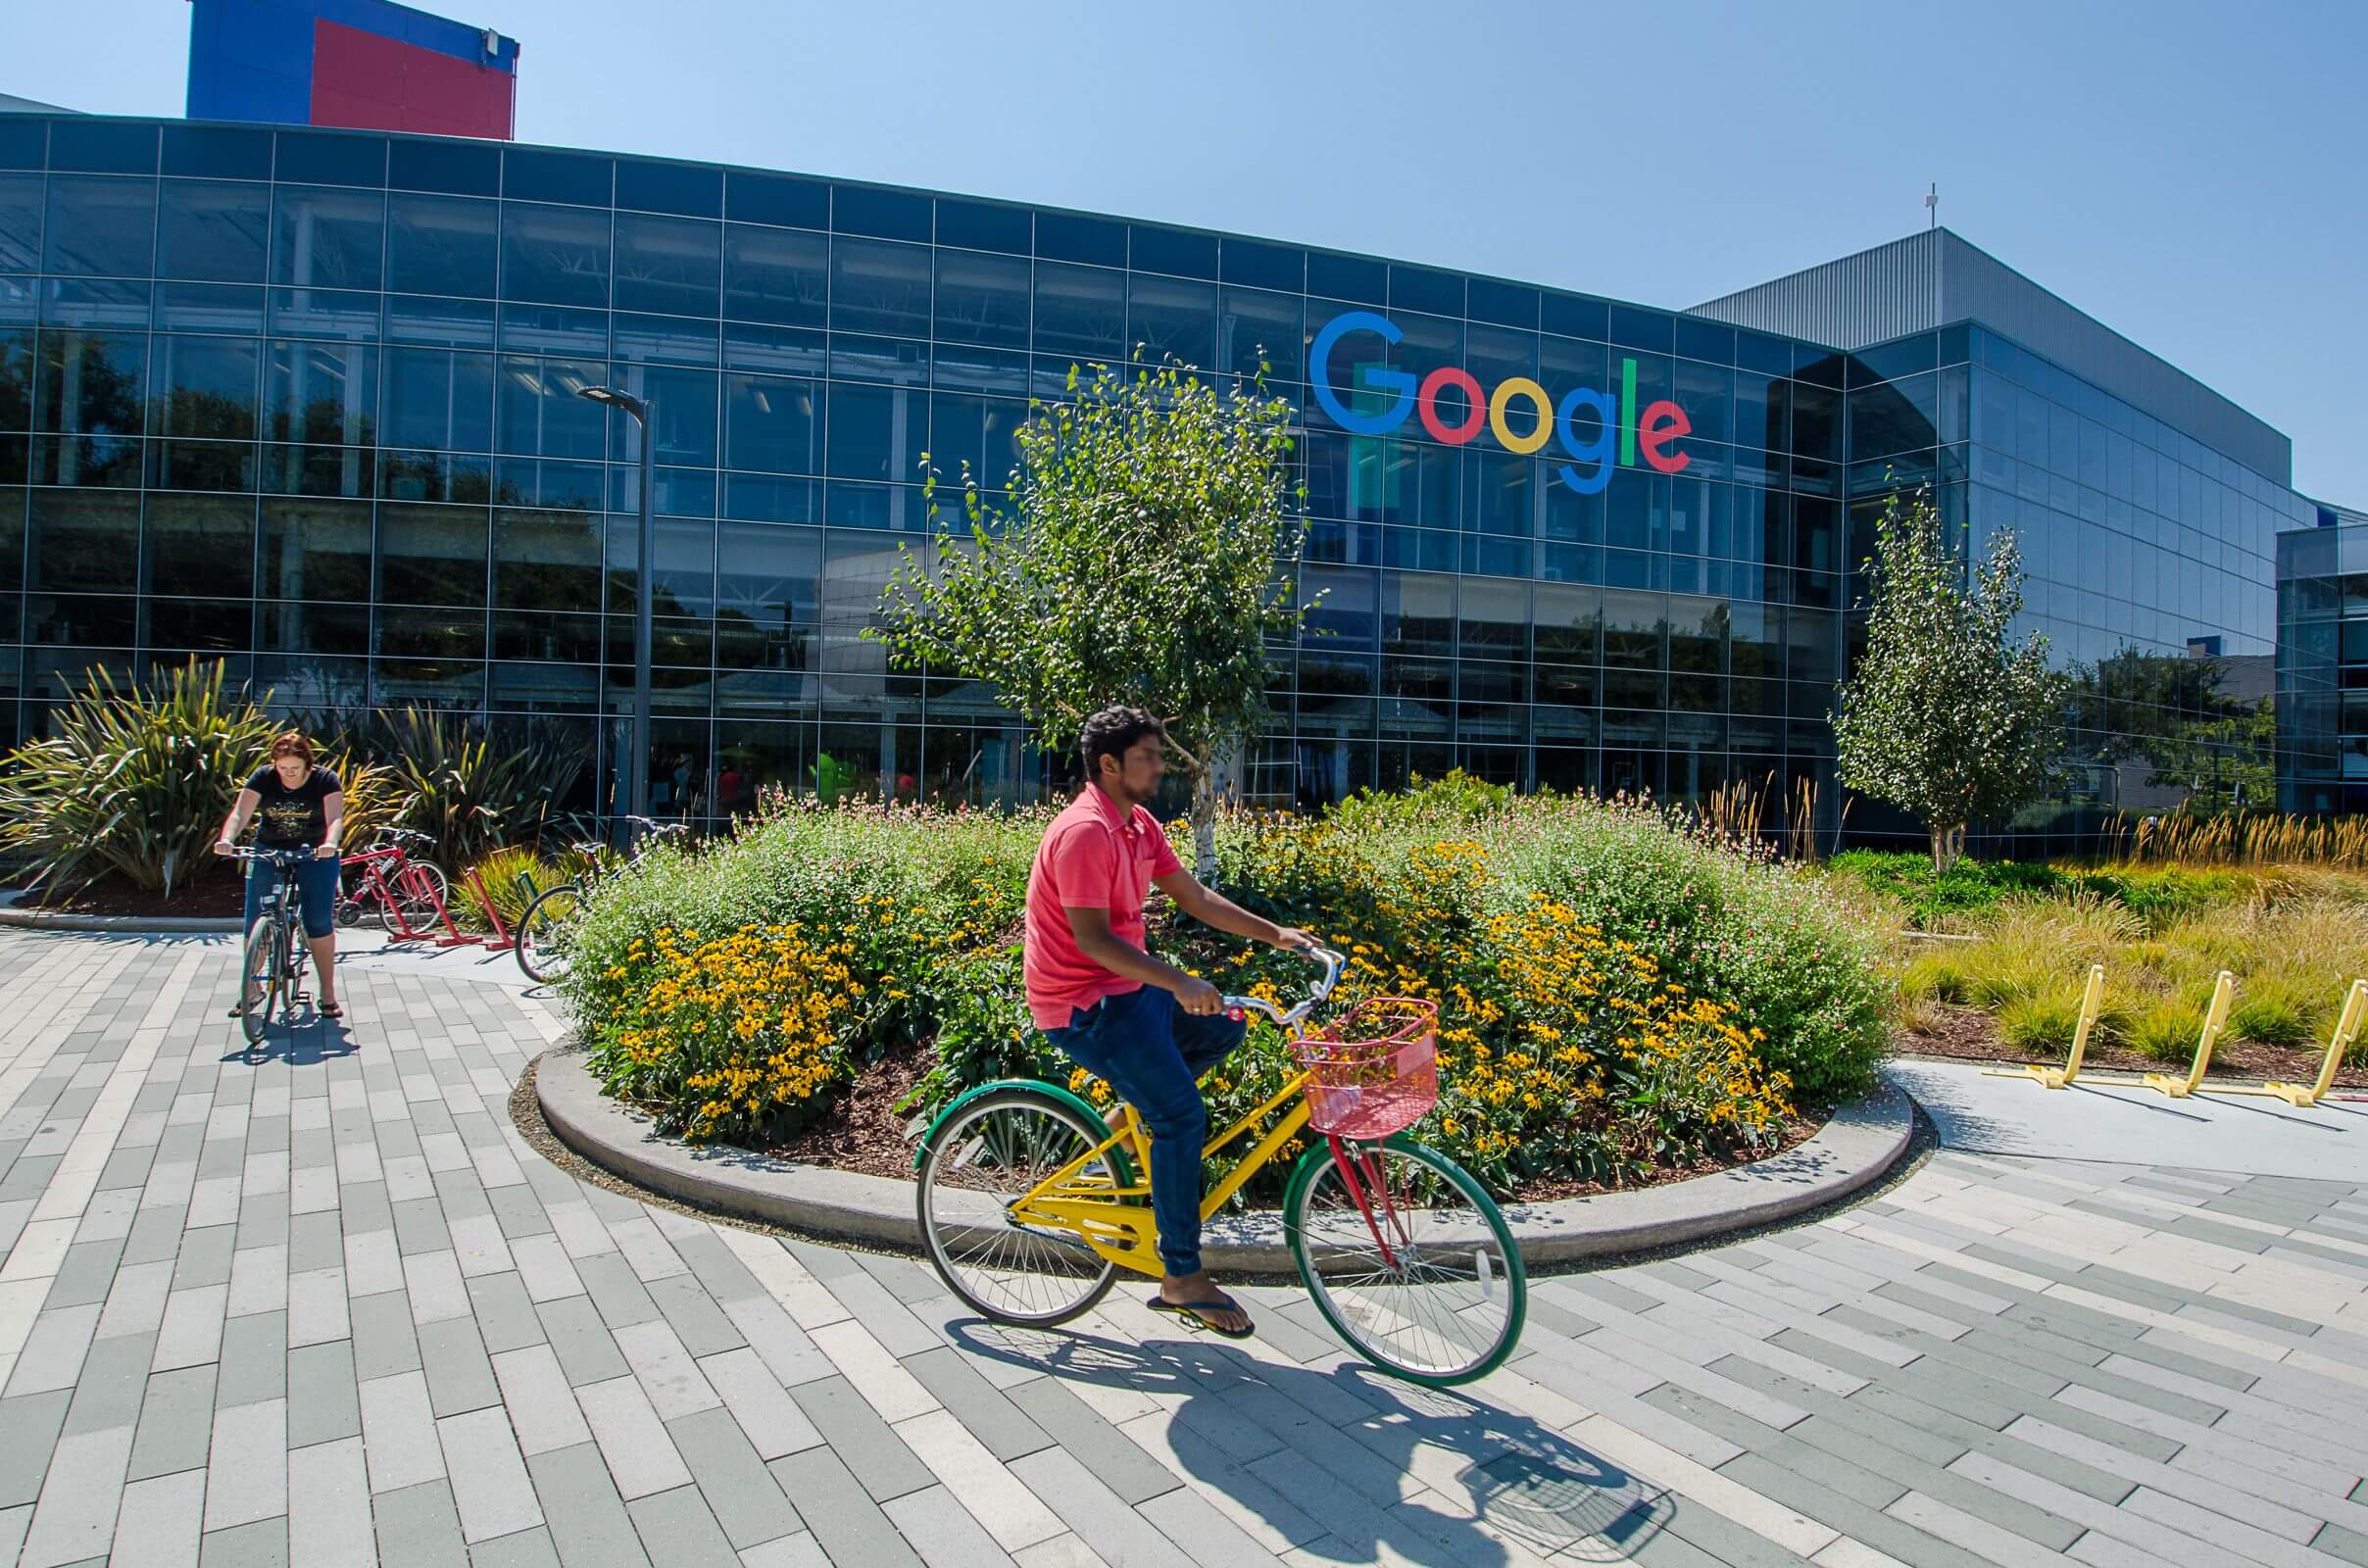 Google’s program for Black college students suffered disorganization and culture clashes, former participants say